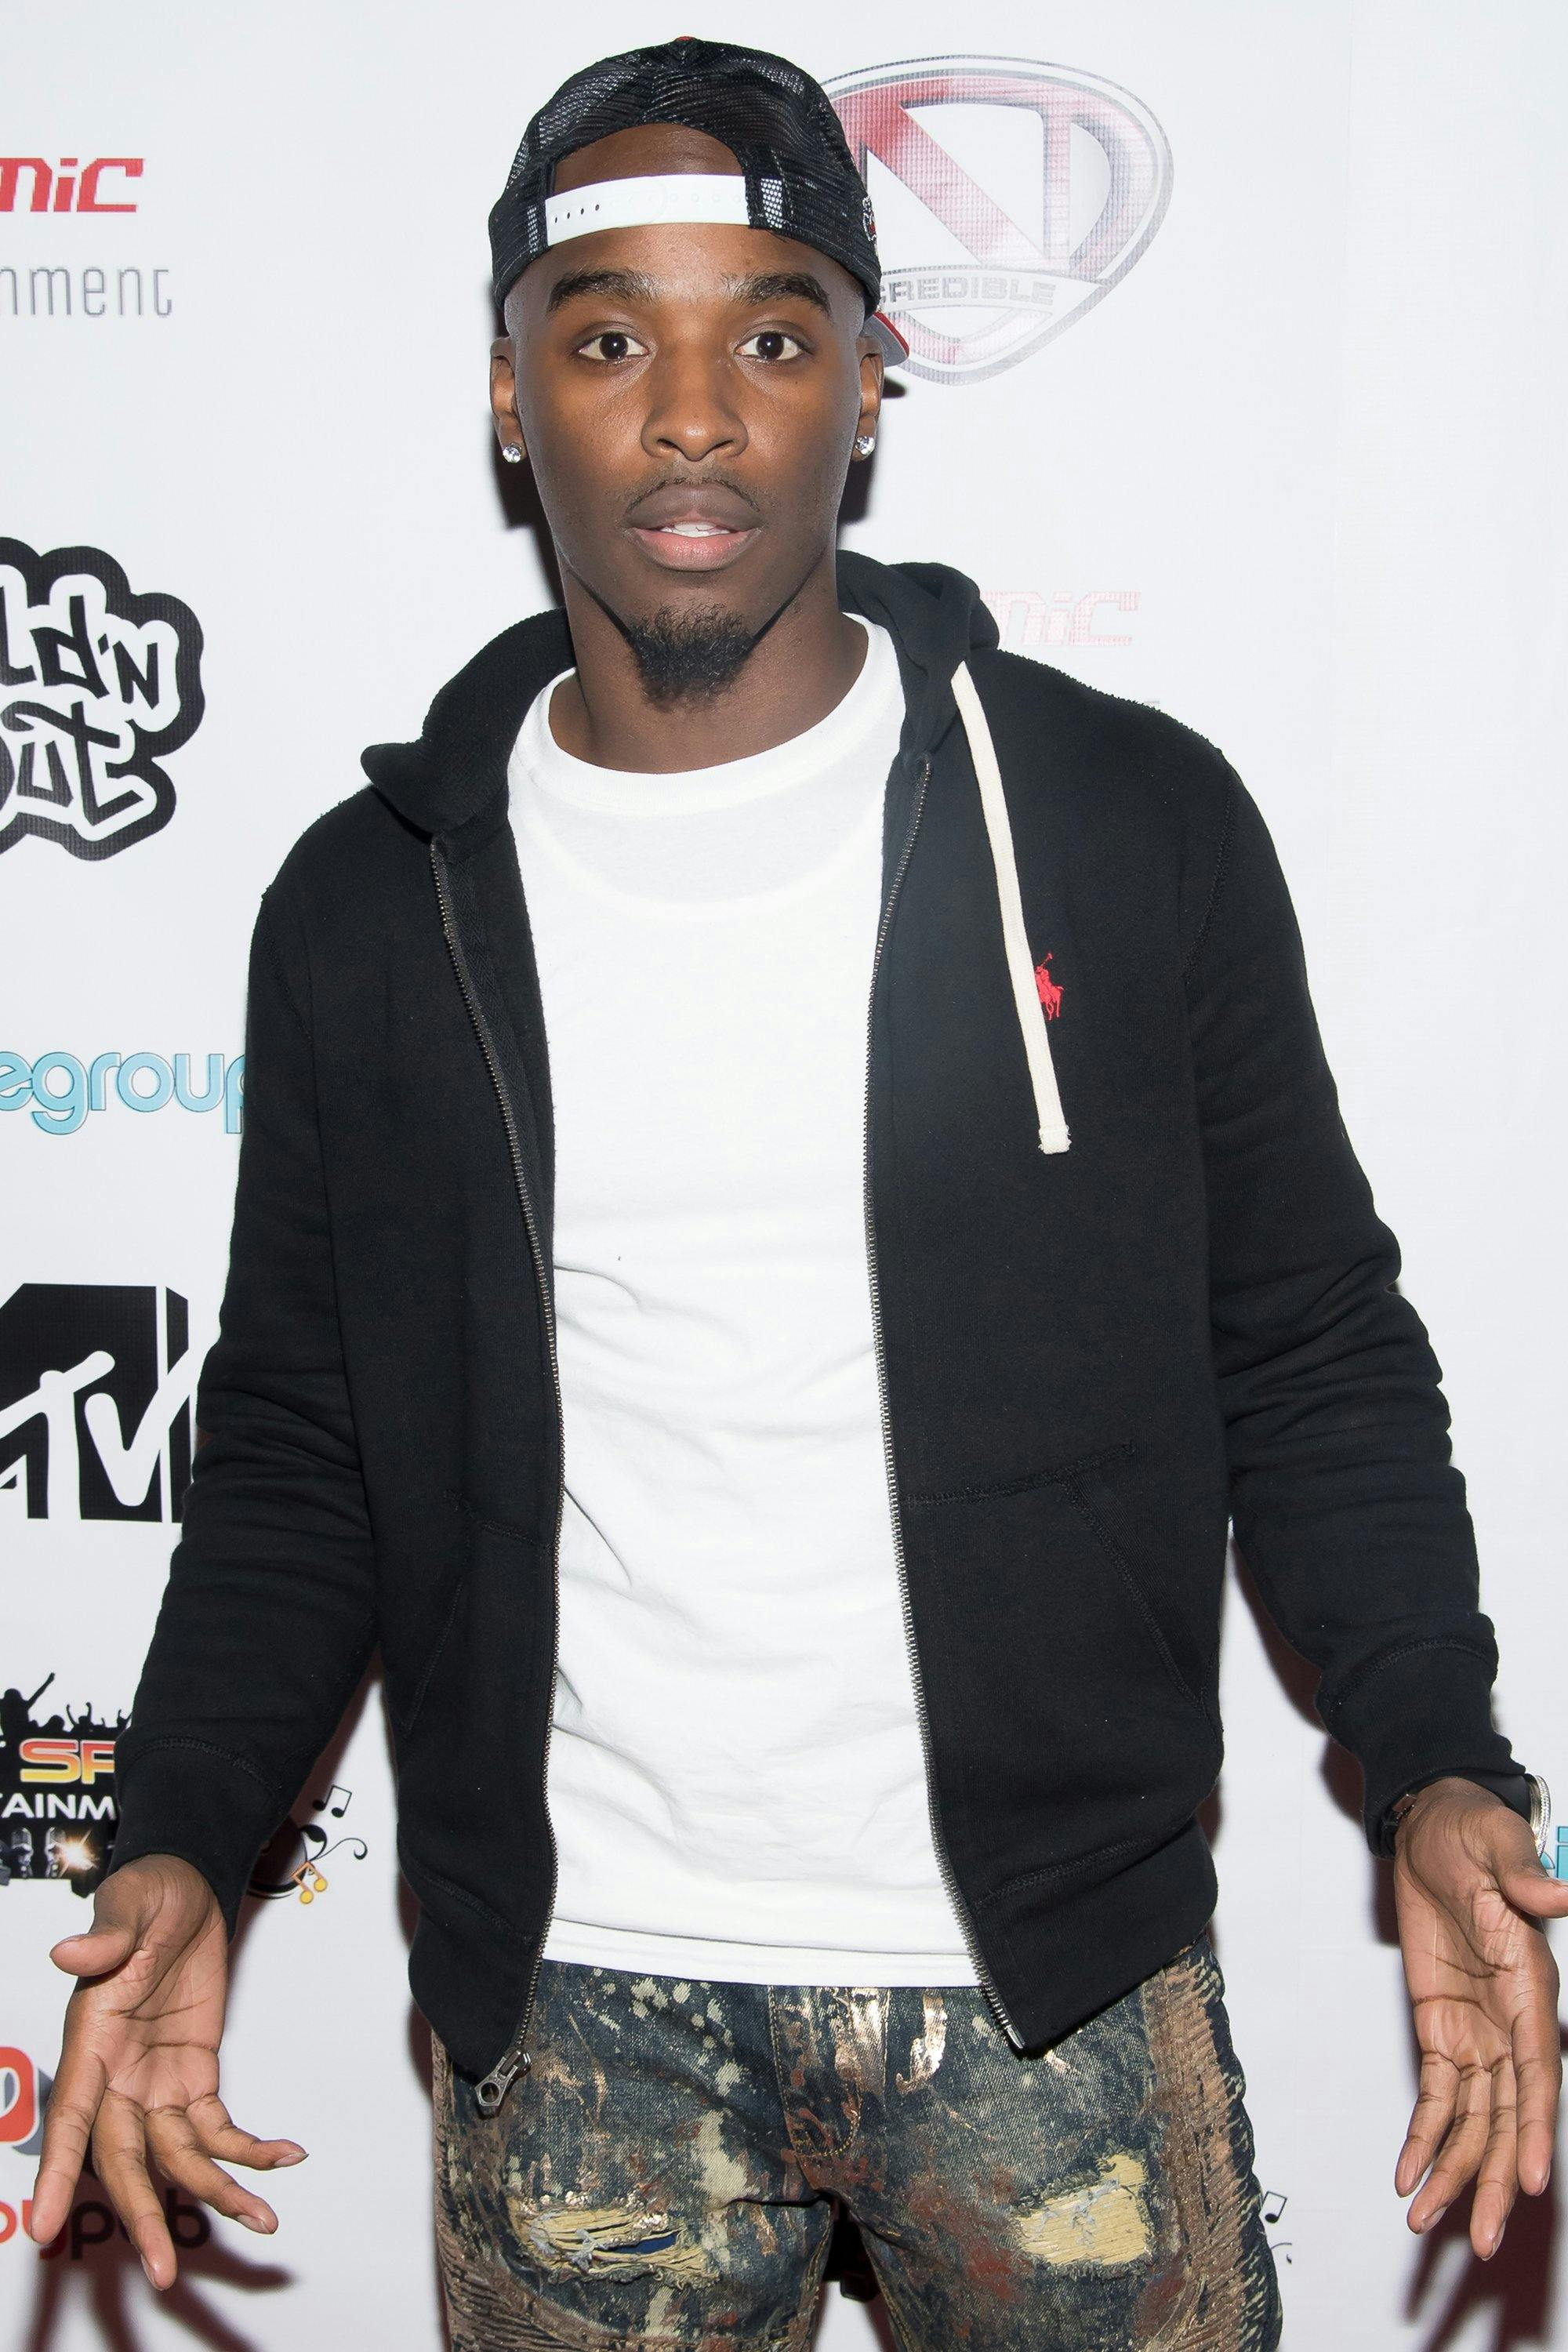 Hitman Holla attends Wild ‘N Out Live at Arena NYC on November
4, 2016 in New York City